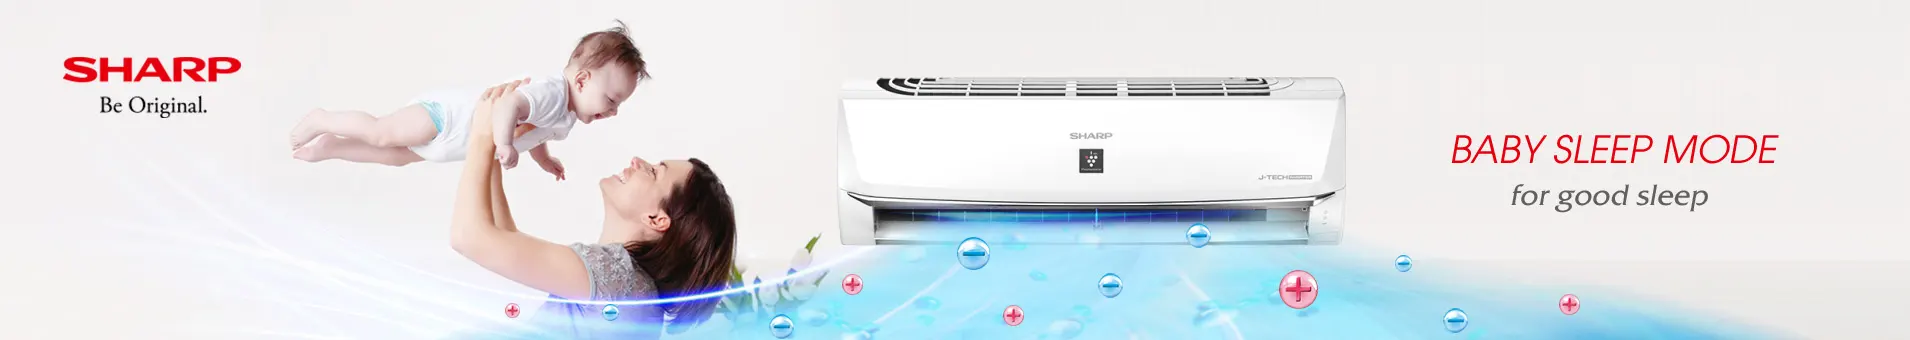 Sharp Air Conditioners